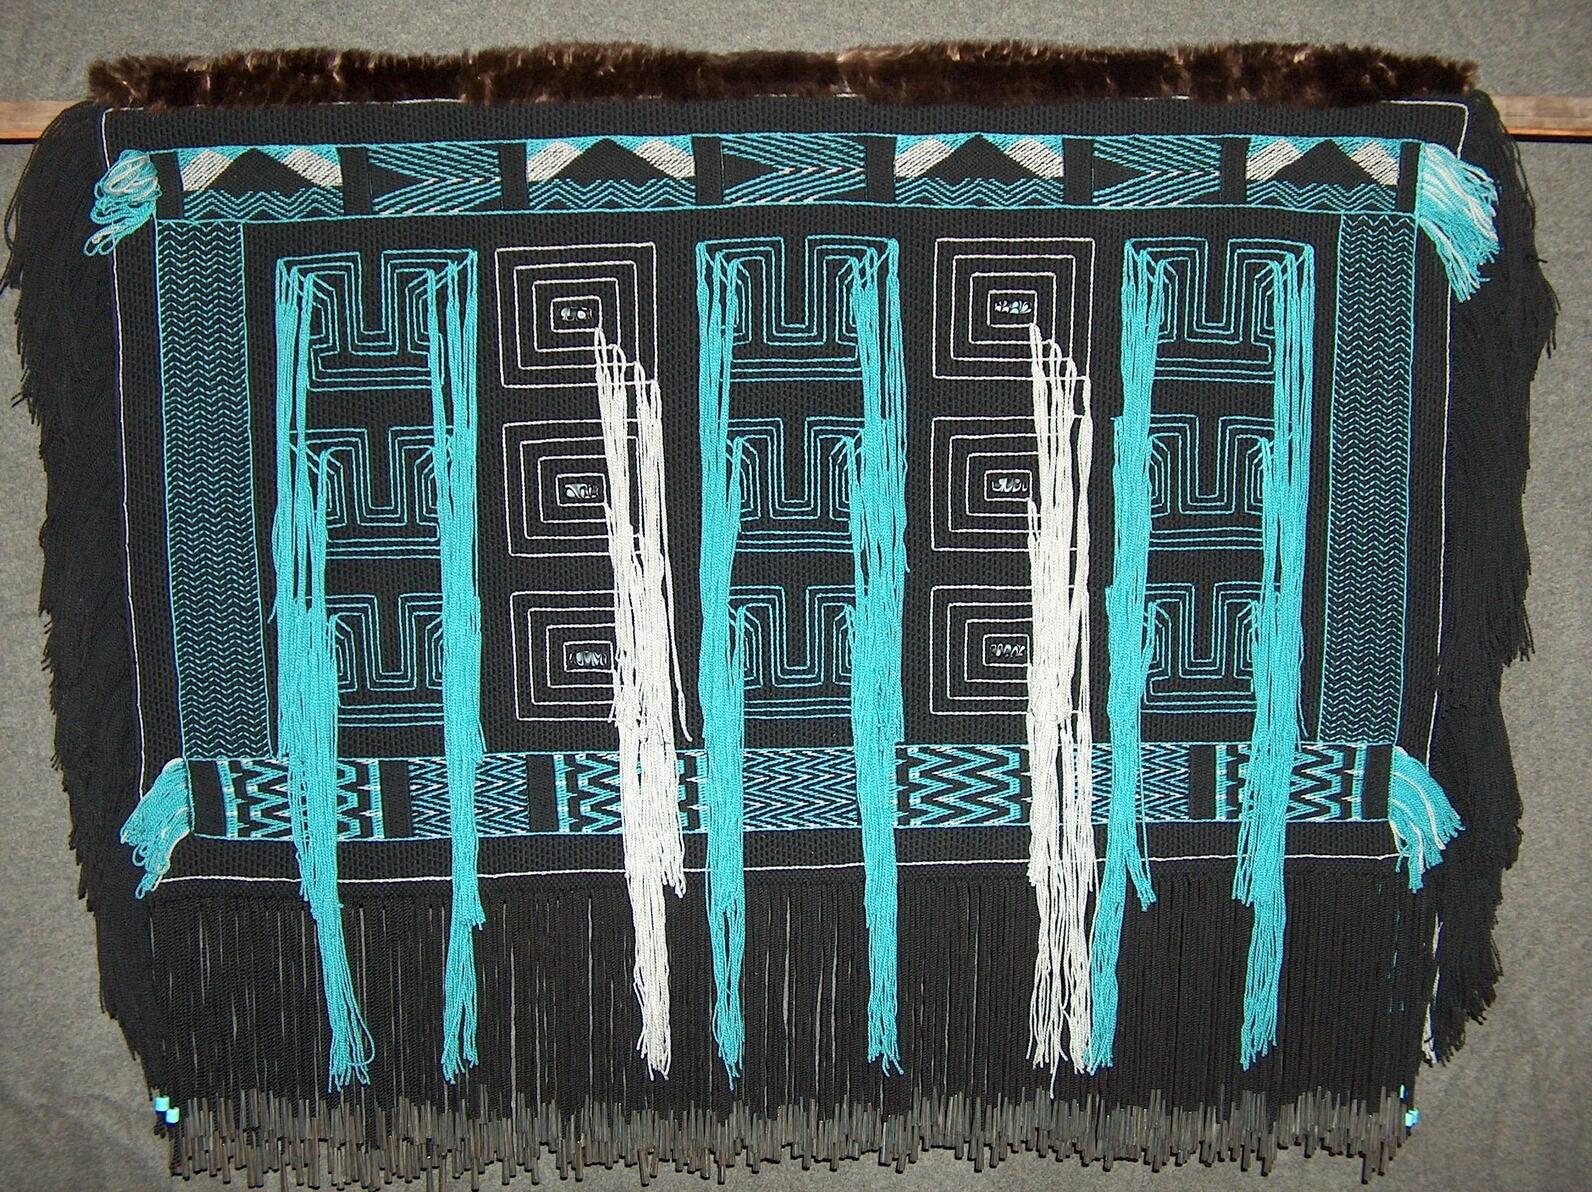 Chilkat woven robe of black, white, gray, and blue